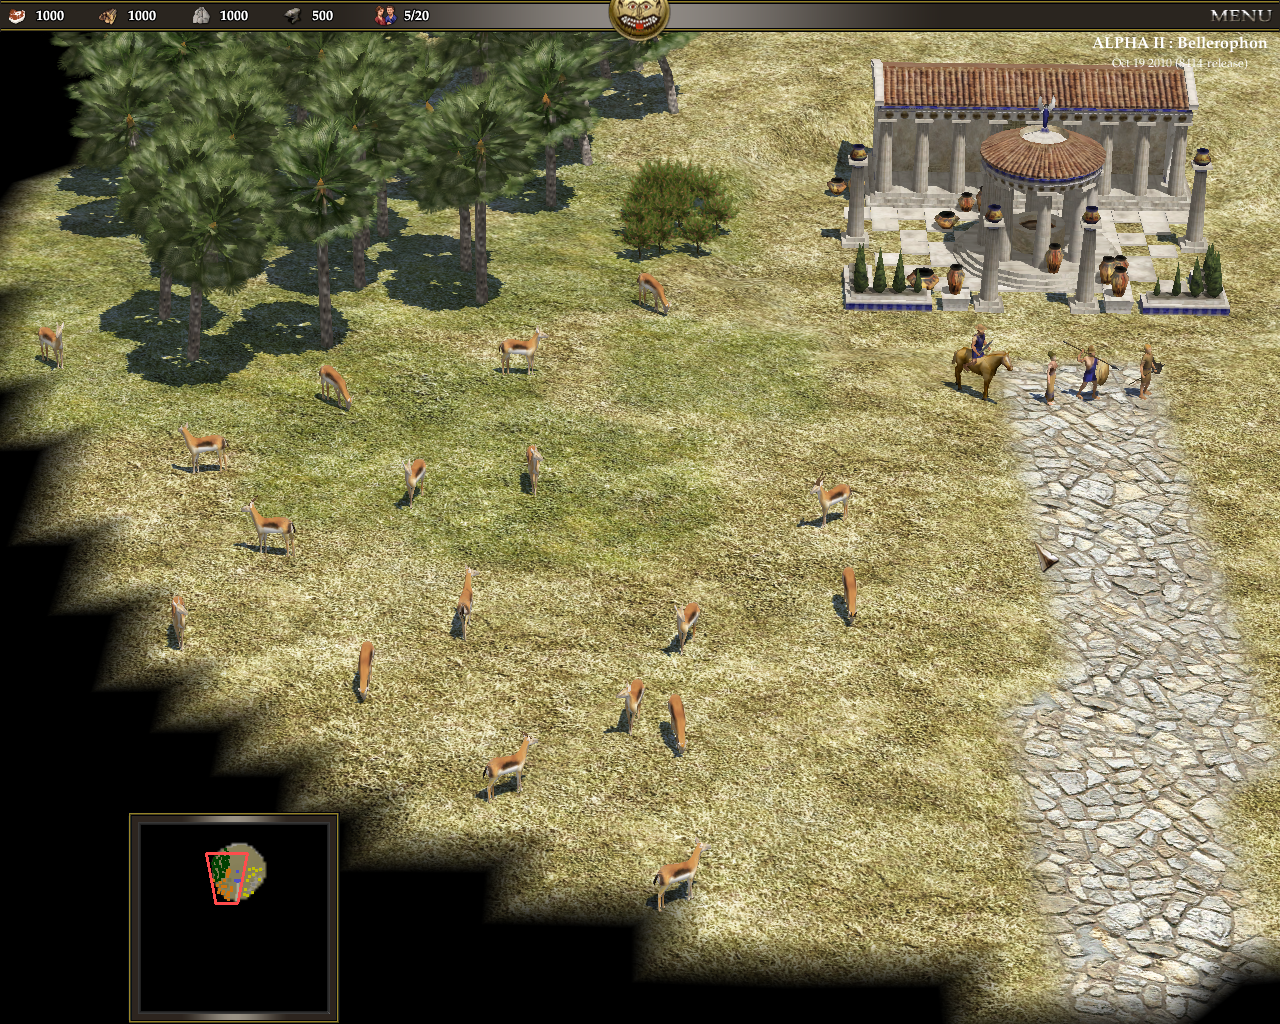 TuxArena Blog: Quick Look at 0 A.D. - Free Linux RTS Game